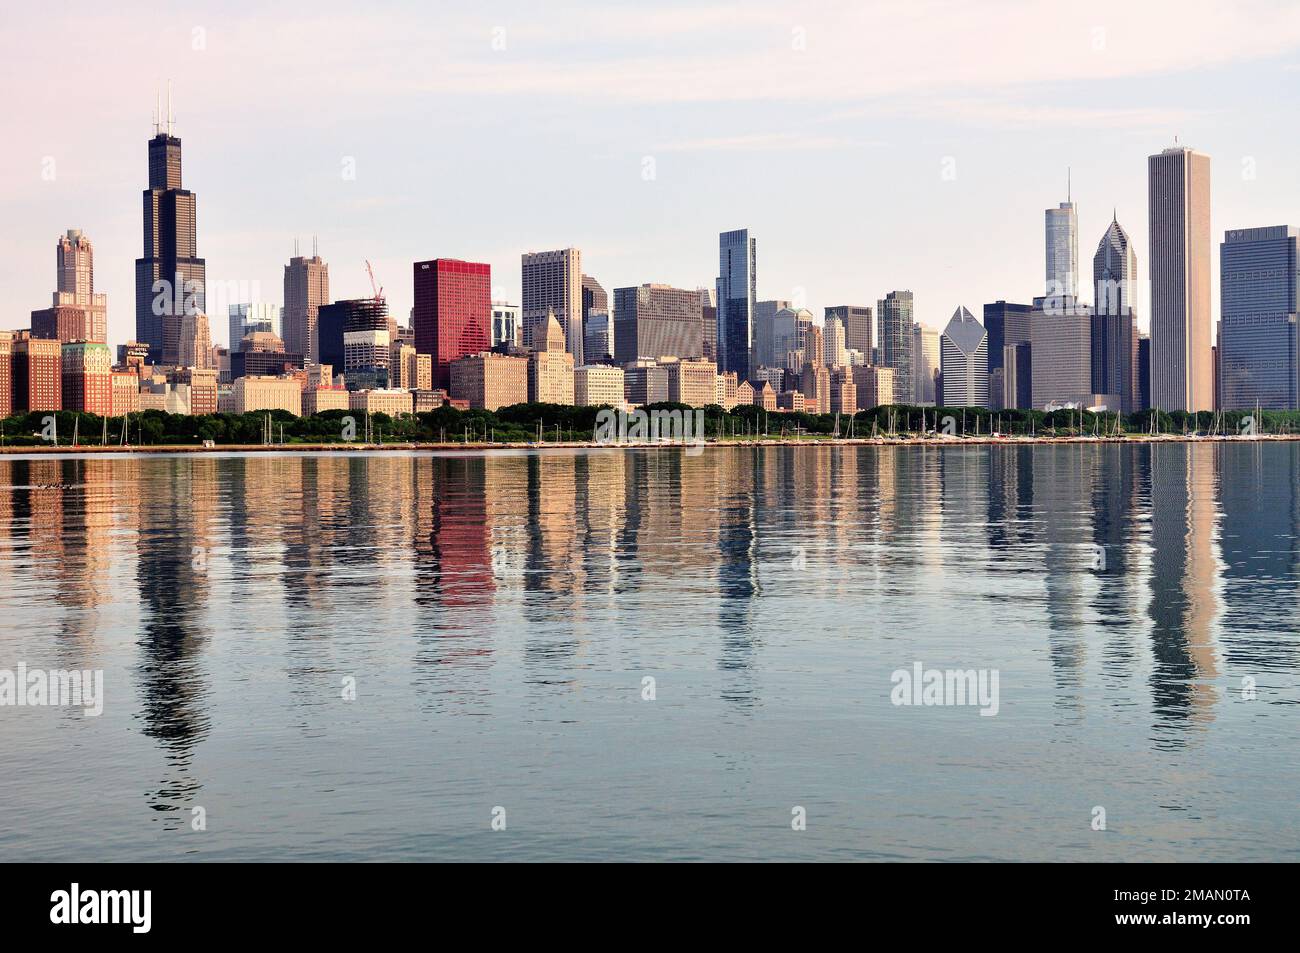 Chicago, Illinois, USA. A hazy late spring morning is reflected in Lake Michigan along with buildings comprising the Chicago skyline. Stock Photo